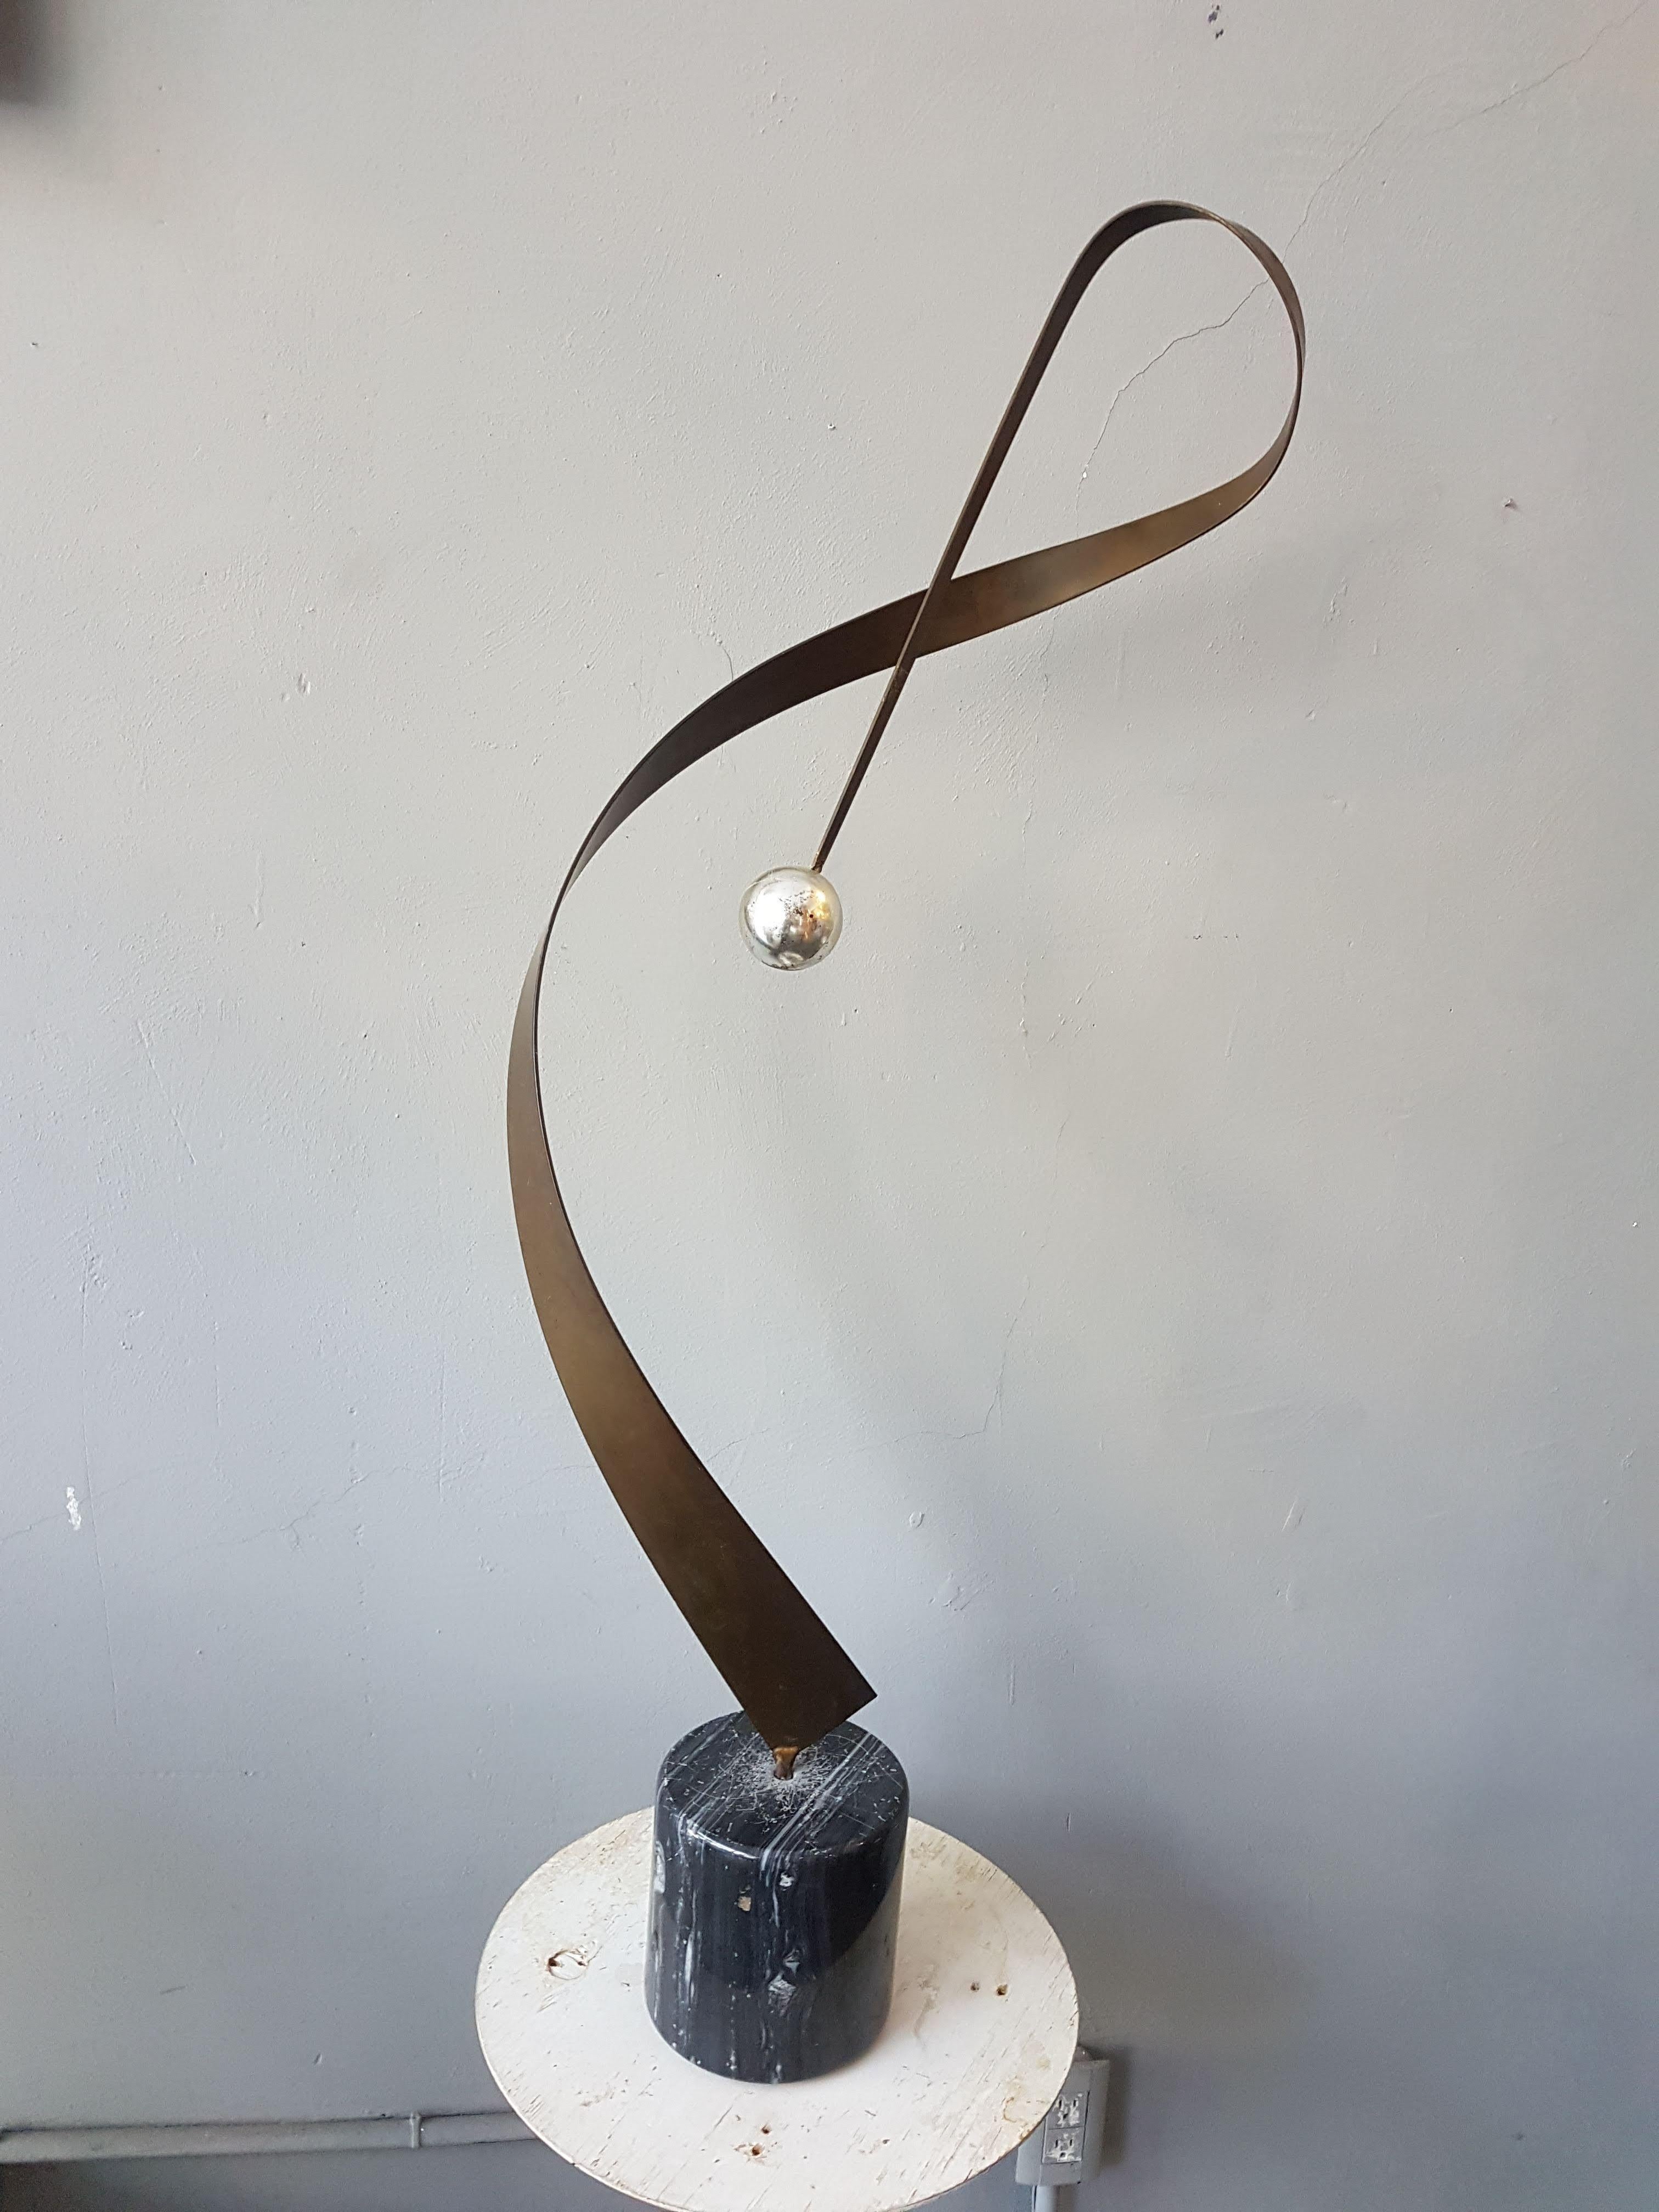 Plated Curtis Jere Abstract Ribbon and Sphere Sculpture